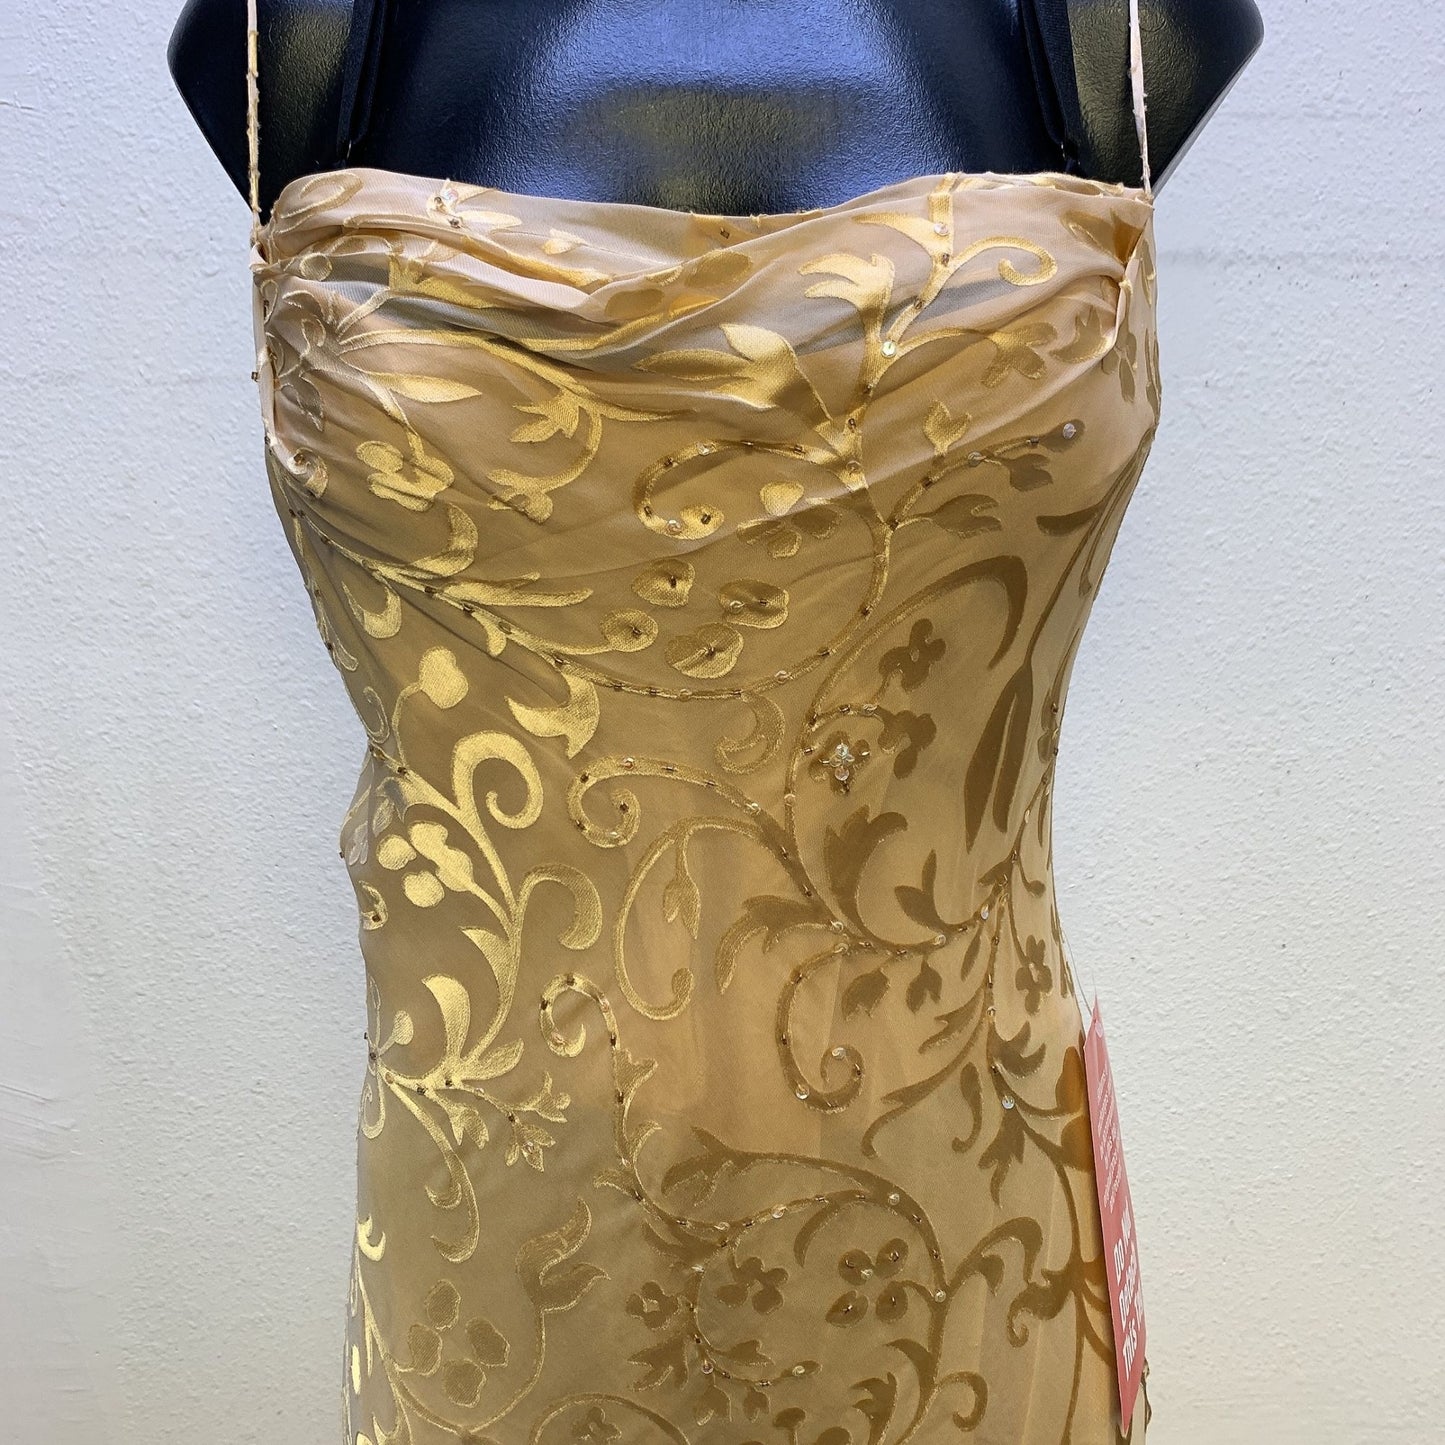 NWT Dave & Johnny Gold Embellished Low Back Maxi Dress Size 11/12